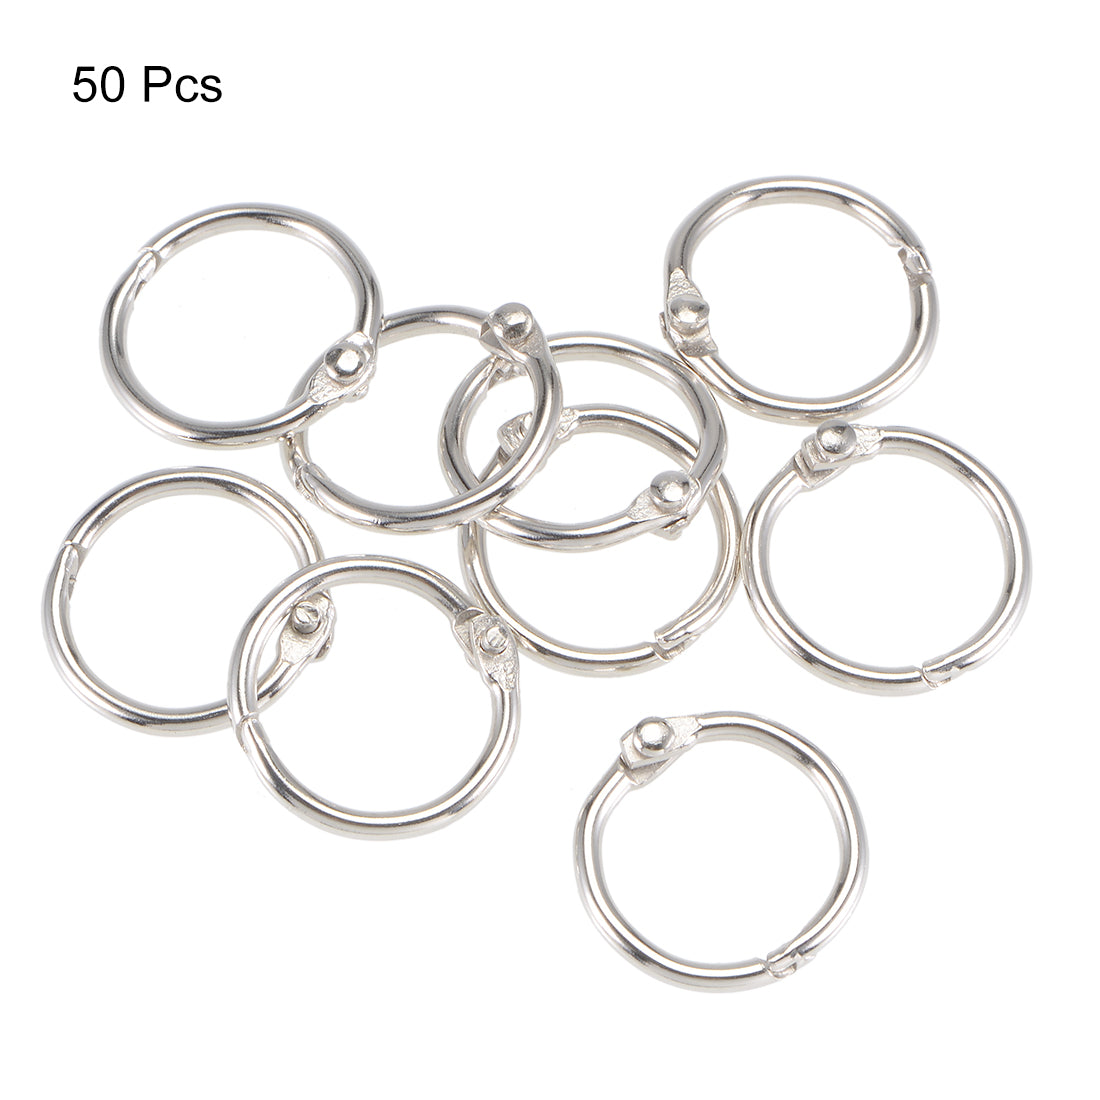 Uxcell Uxcell Binder Rings 40mm Open Jump Connector for Lanyard Zipper Handbag, Nickel Plated Iron, Pack of 50